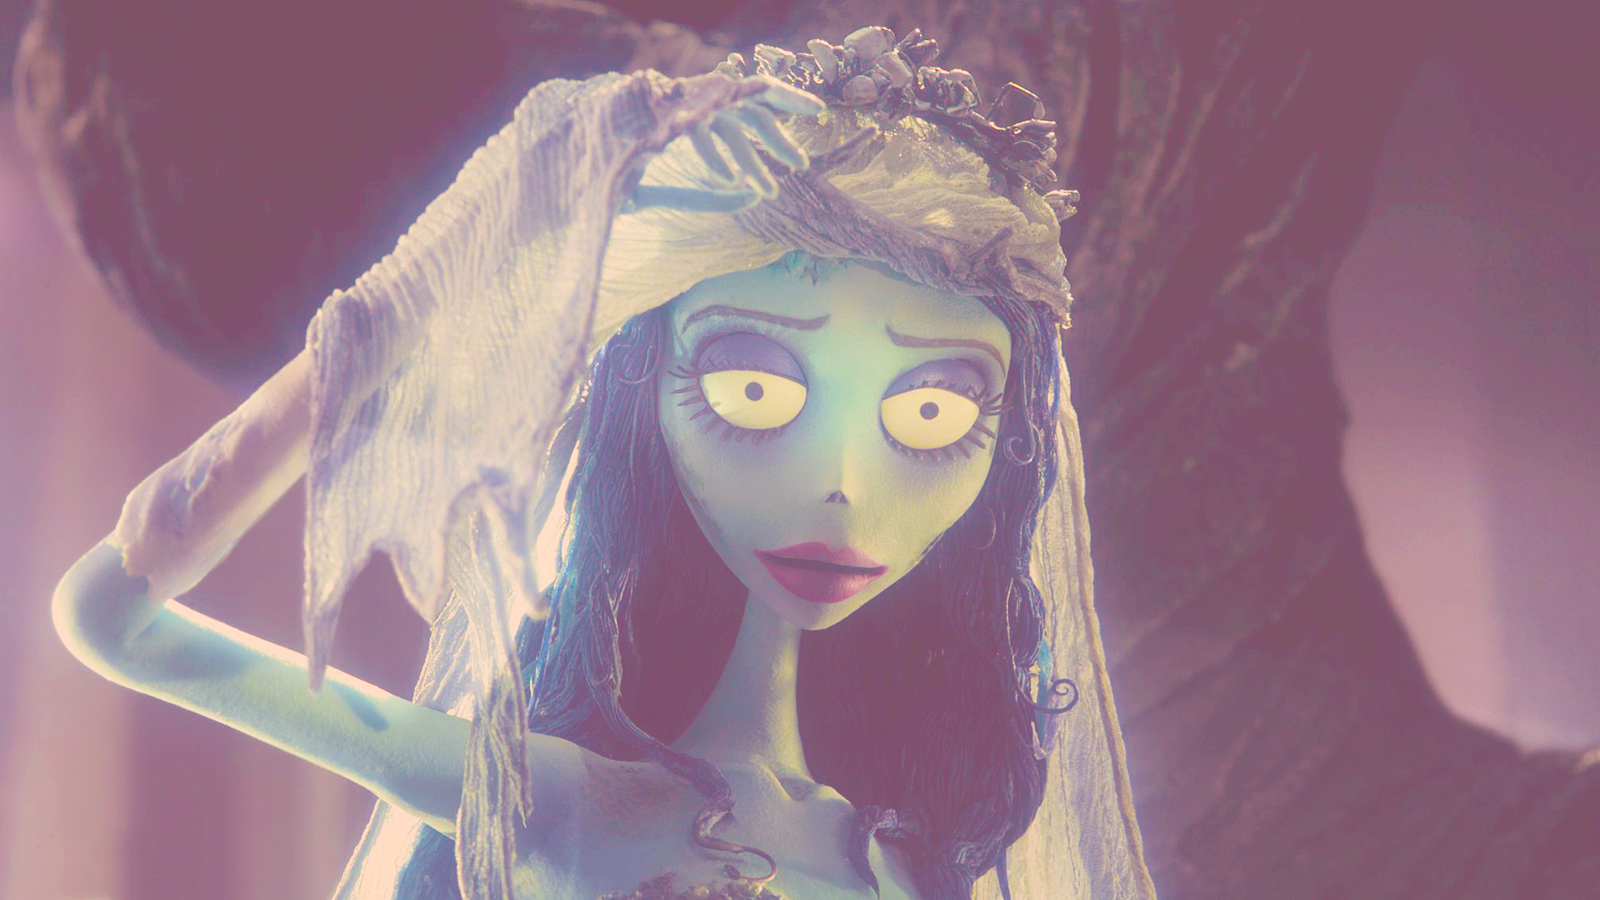 corpse bride, movie, tim burton wallpapers for tablet